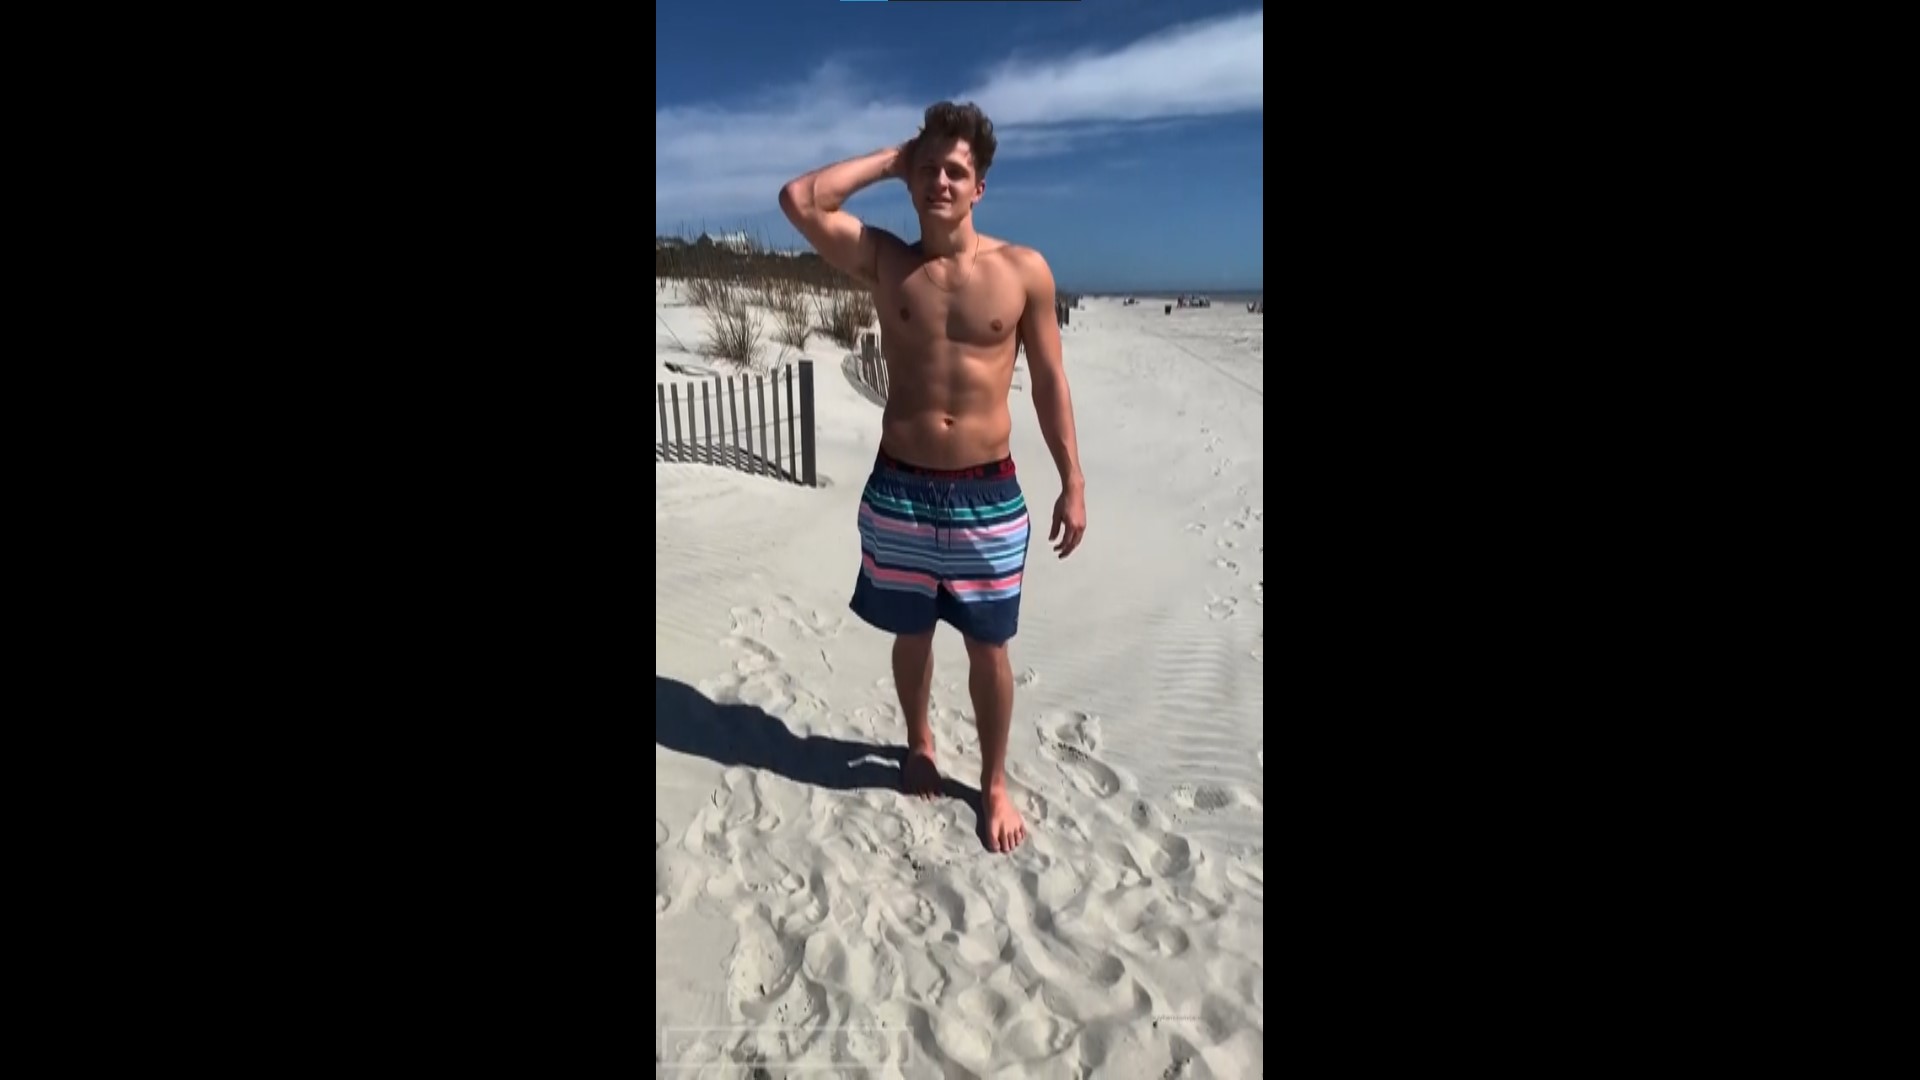 jacking off on the beach